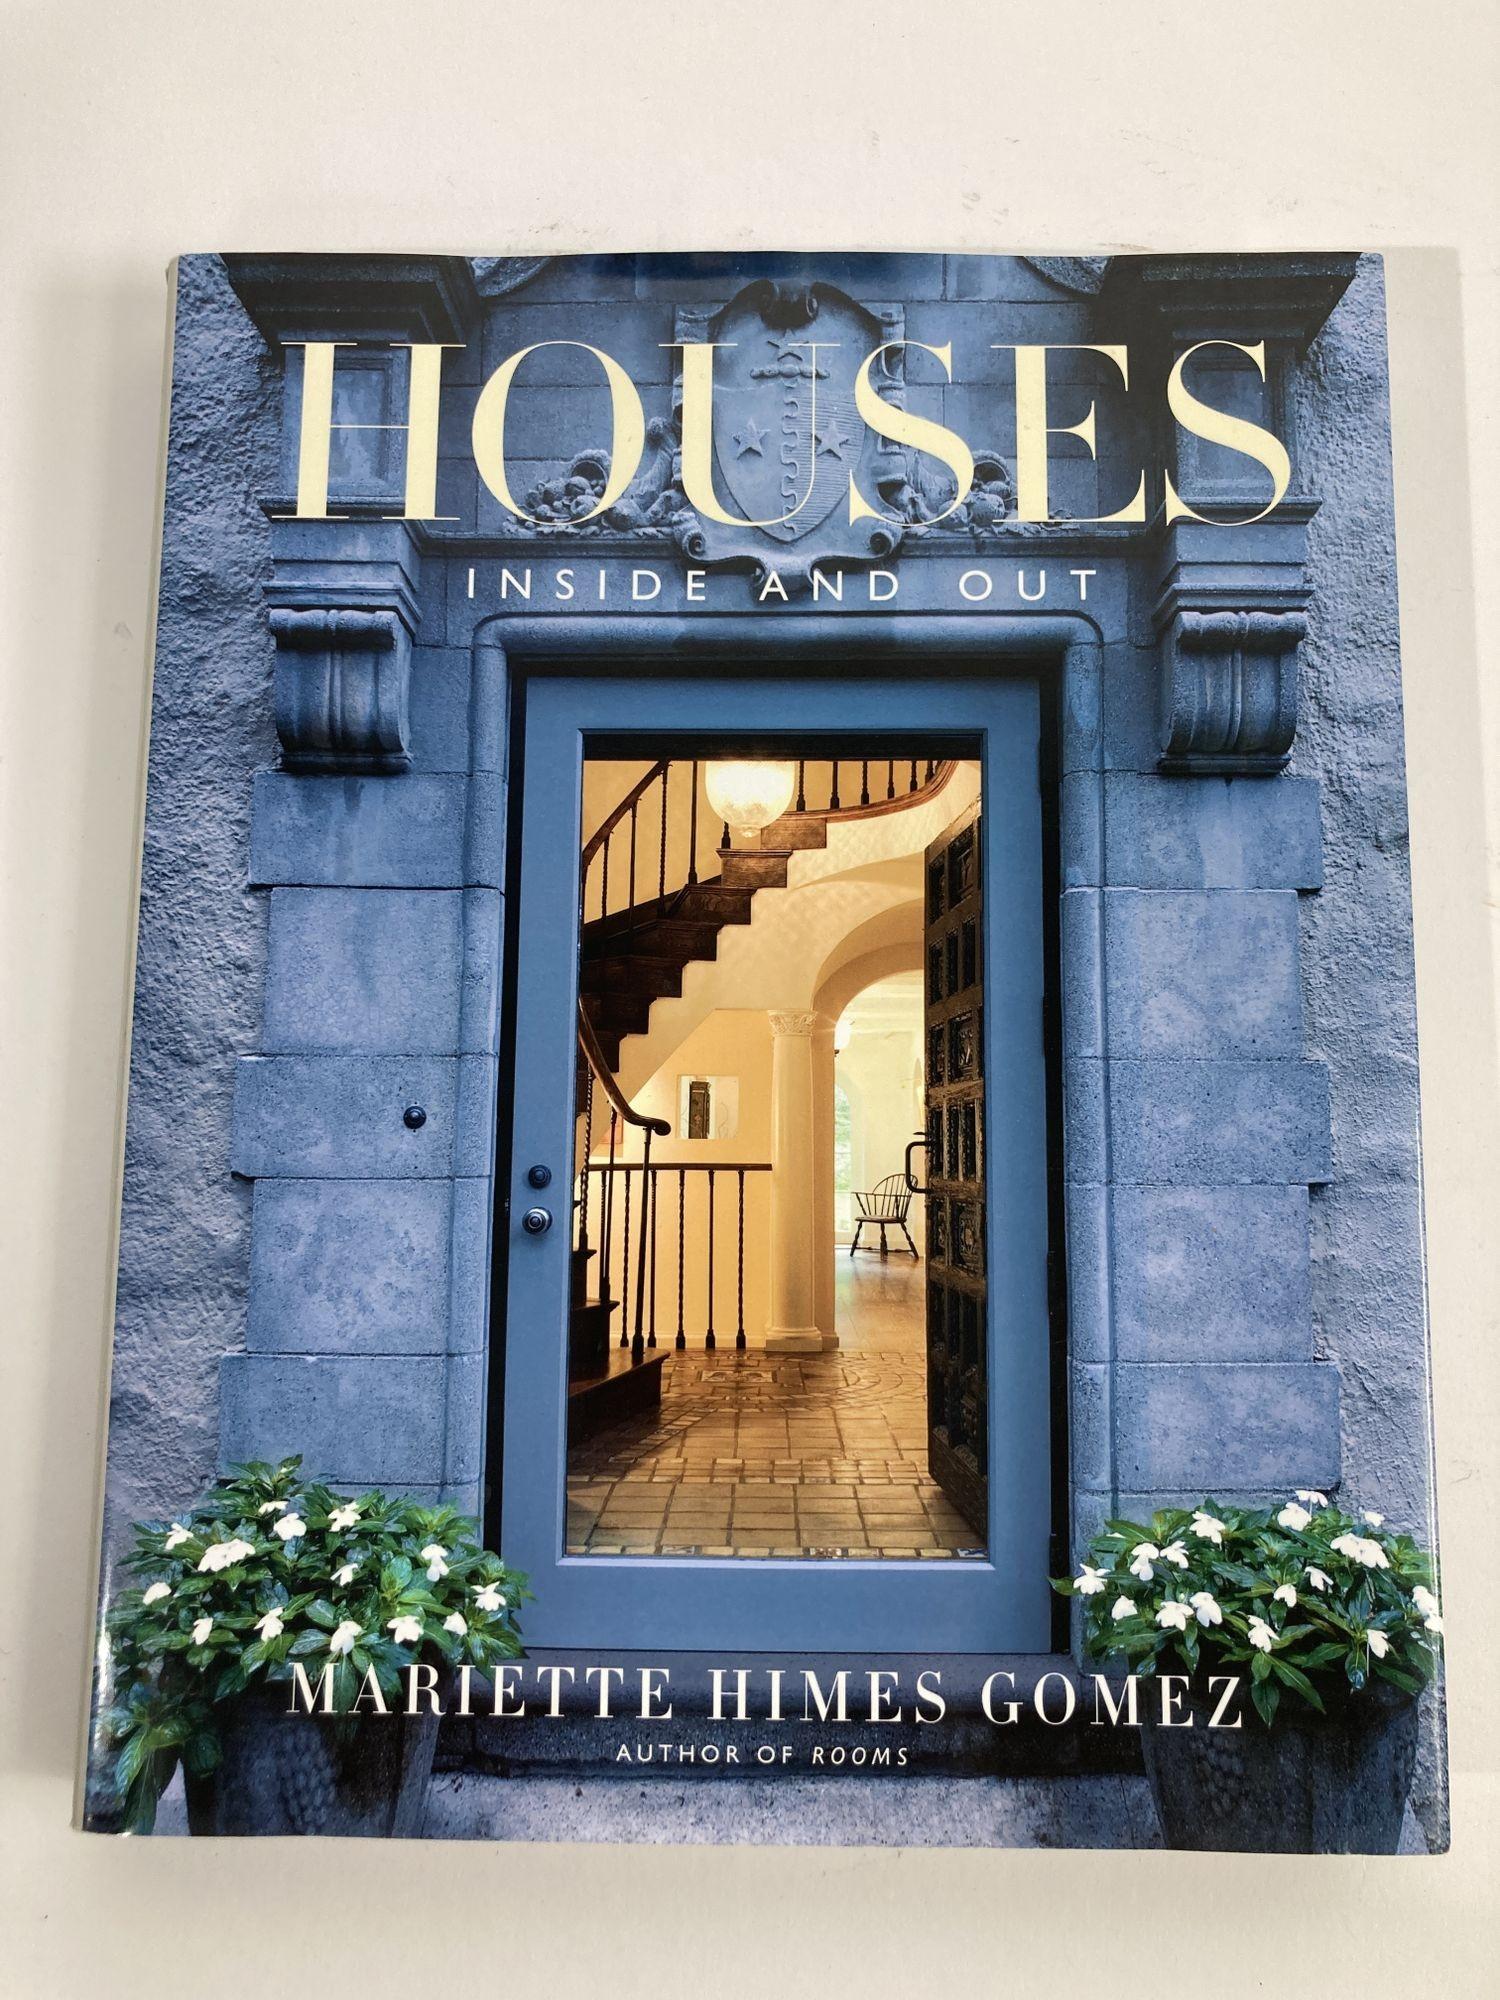 Houses In and Out Hardcover Design Book by Mariette Himes Gomez.


The award-winning designer and author of Rooms showcases inspiring opportunities for the exteriors, interiors, and details of houses in this lavishly photographed